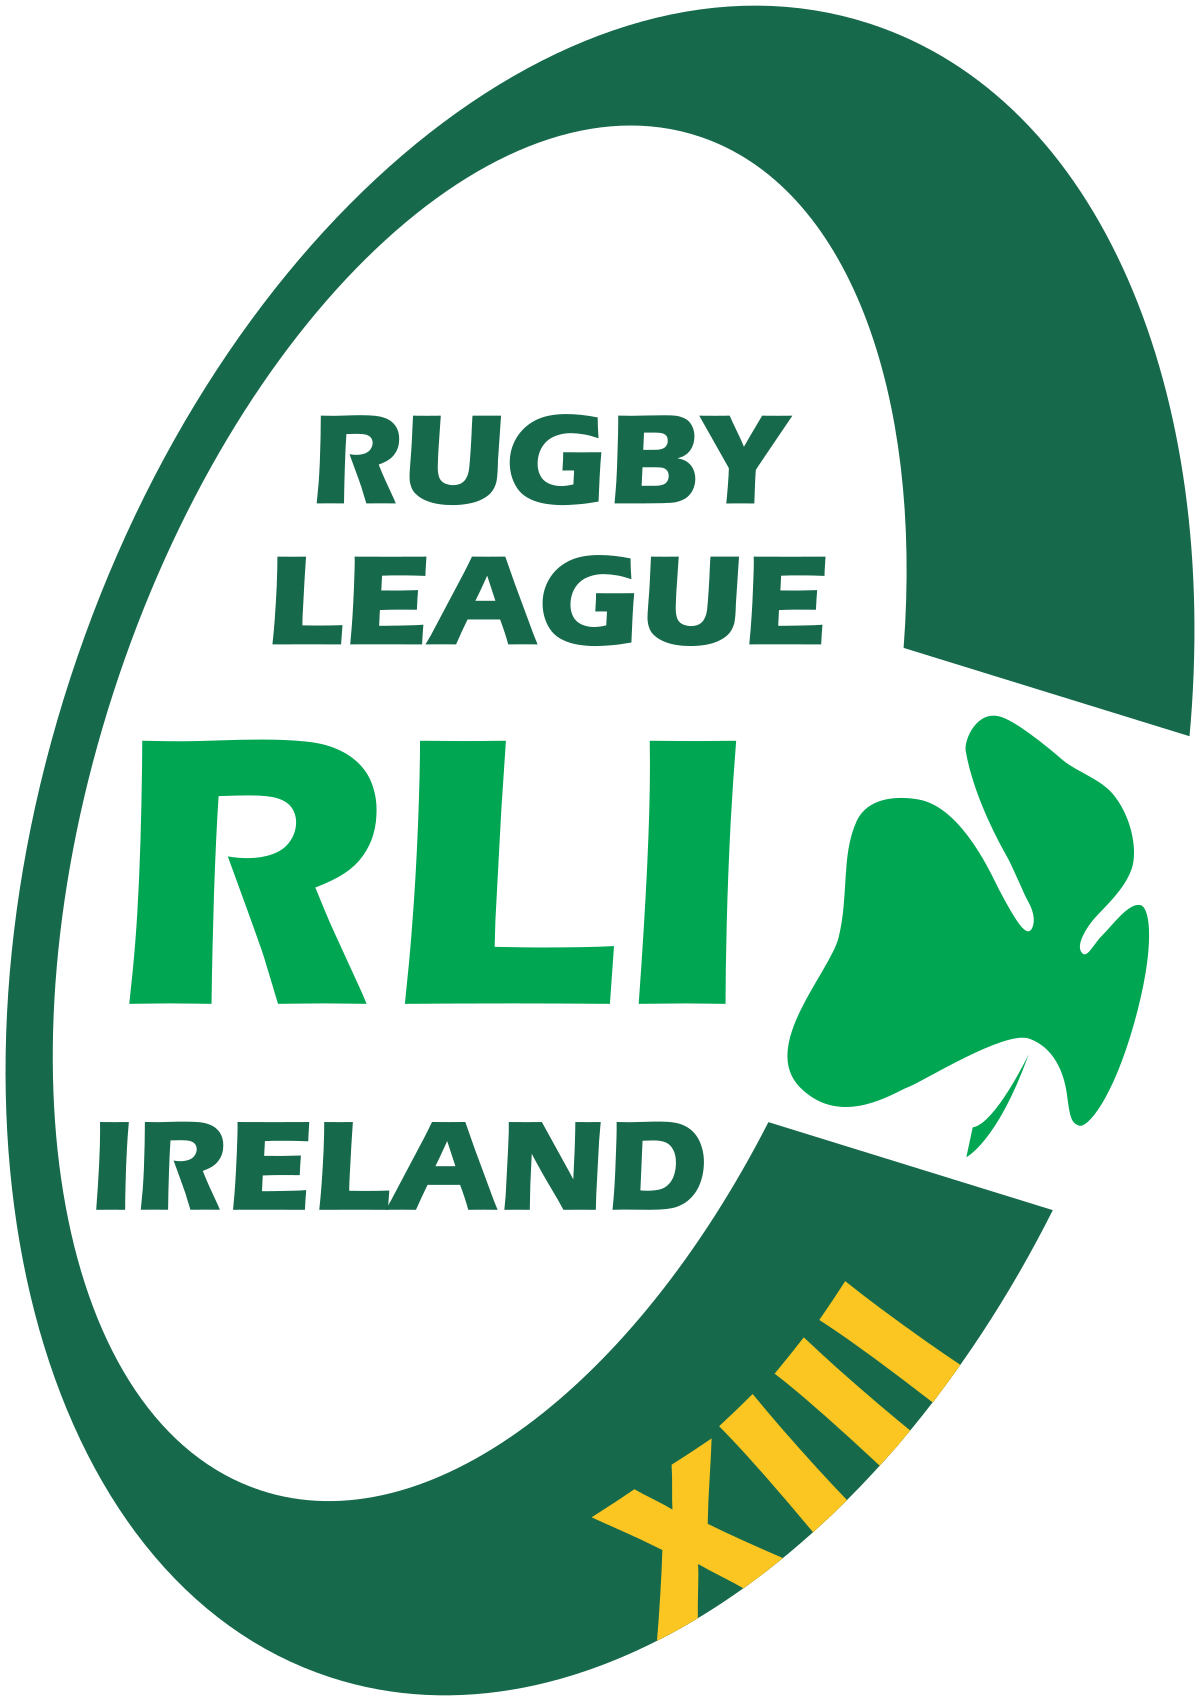 Rugby League Logo - Rugby League Ireland